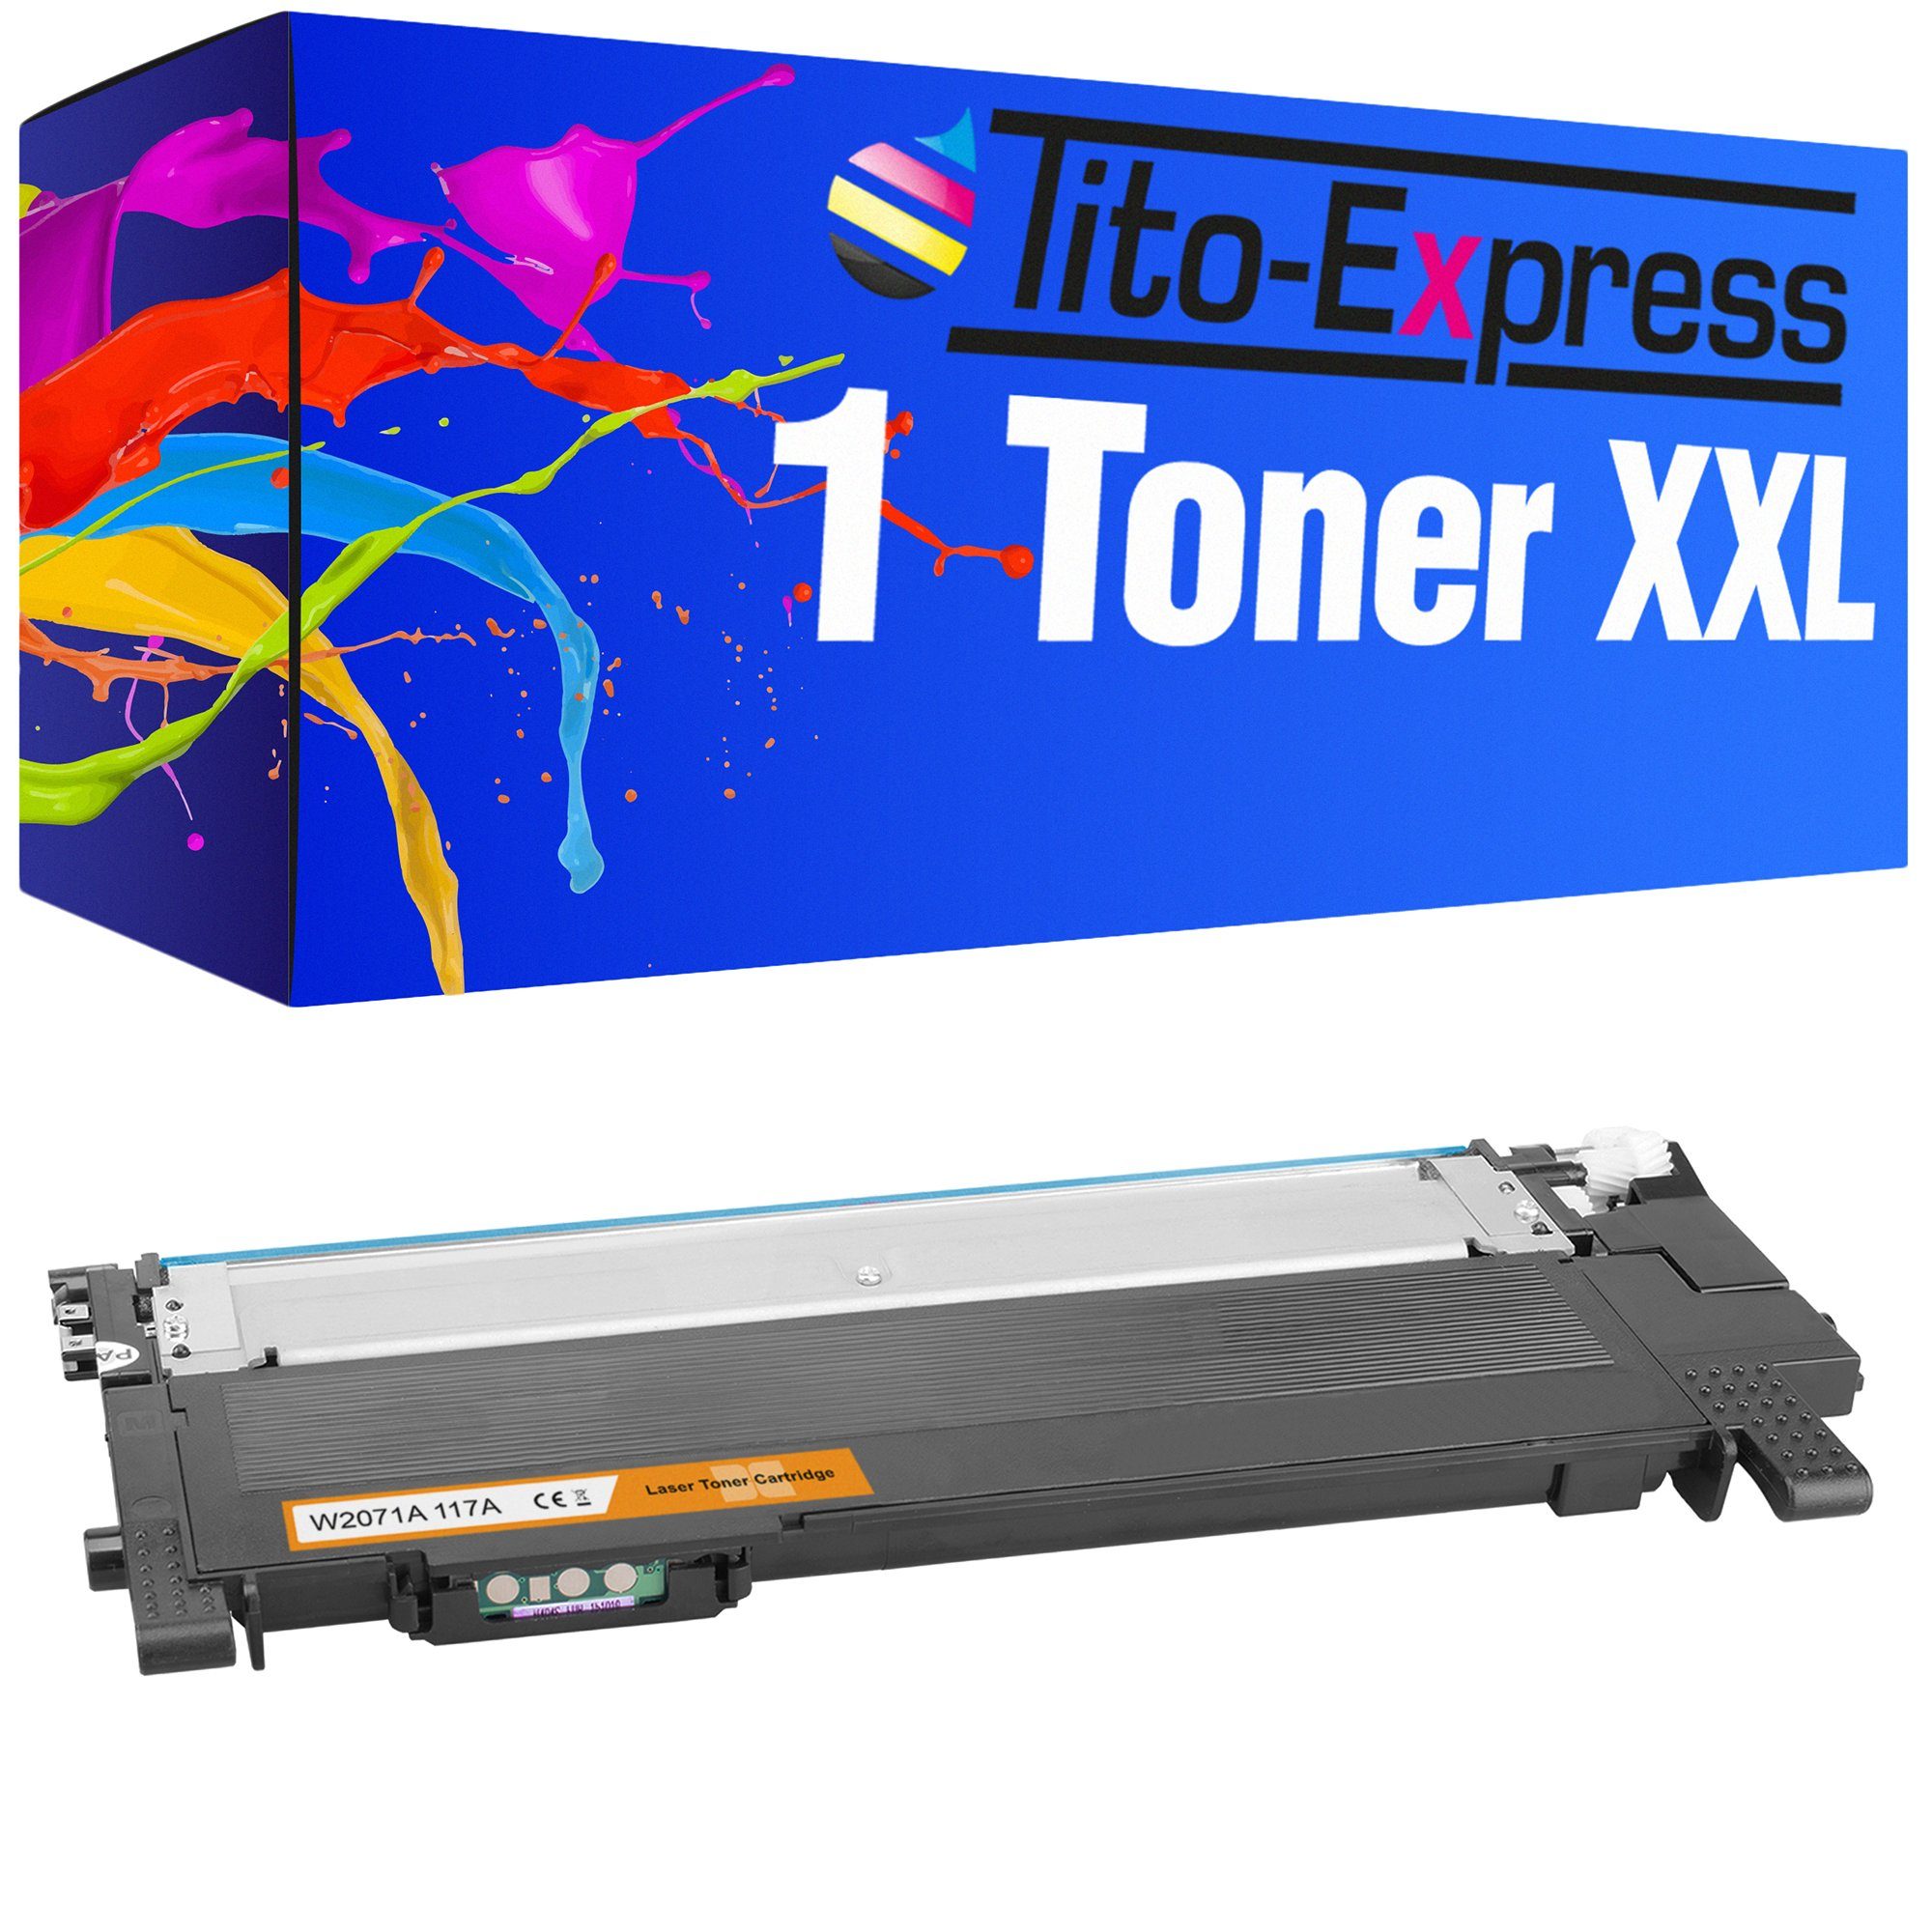 Tito-Express Tonerpatrone ersetzt HP W2070A W 2070 A HP 117A, (1x Cyan), für Color Laser MFP 178nwg 179fwg 150nw 179fnw 150a 178nw MFP-170